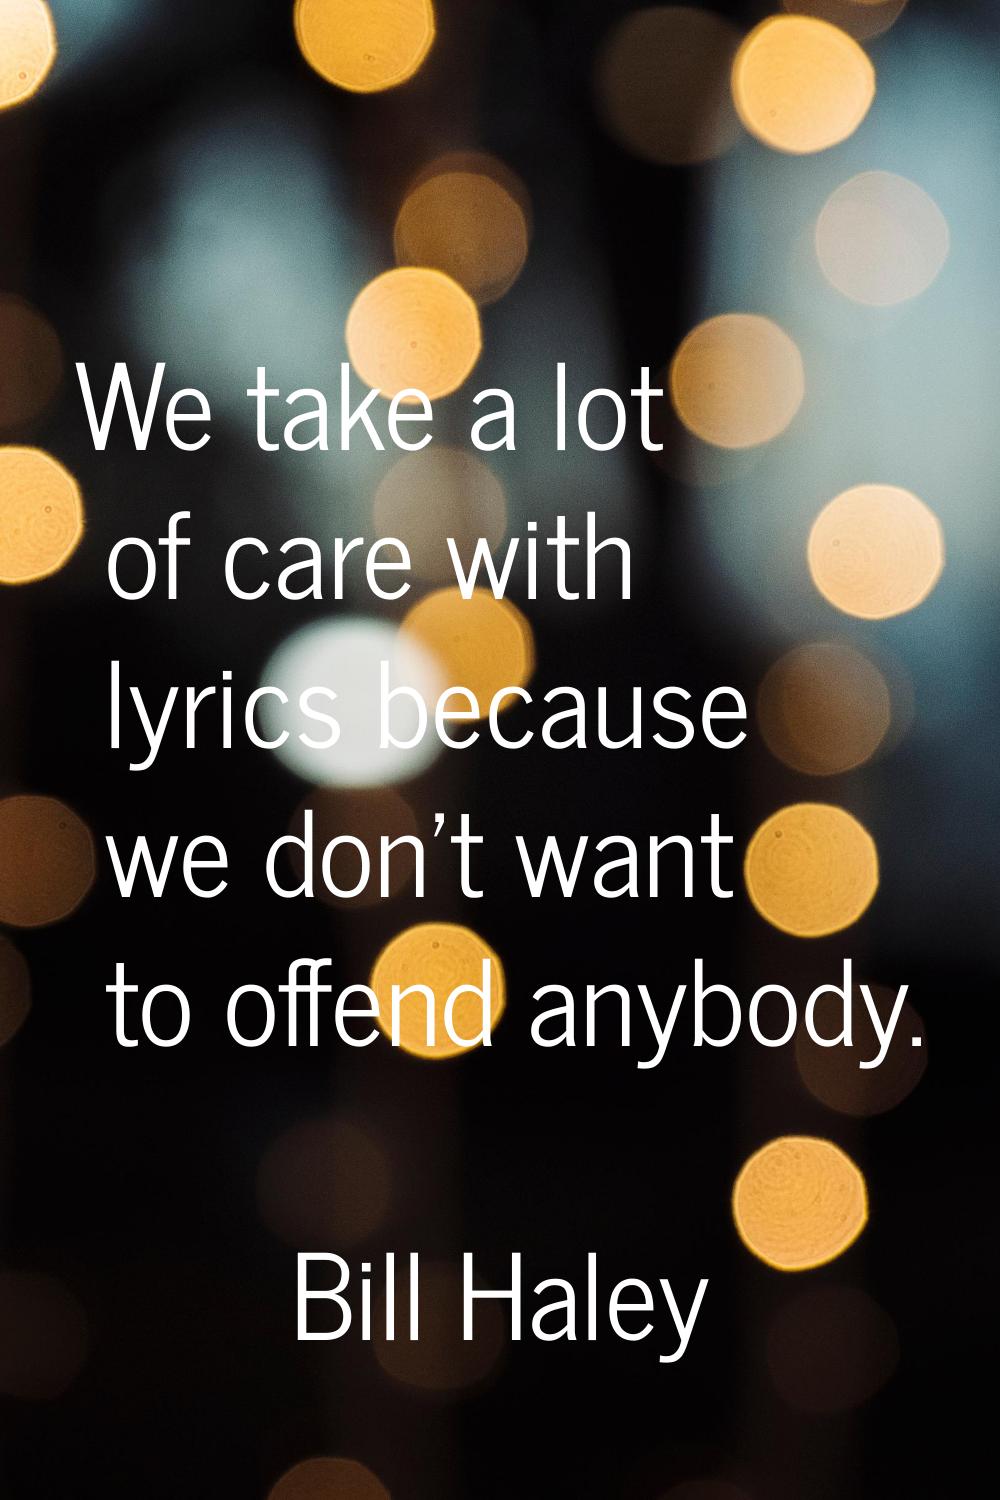 We take a lot of care with lyrics because we don't want to offend anybody.